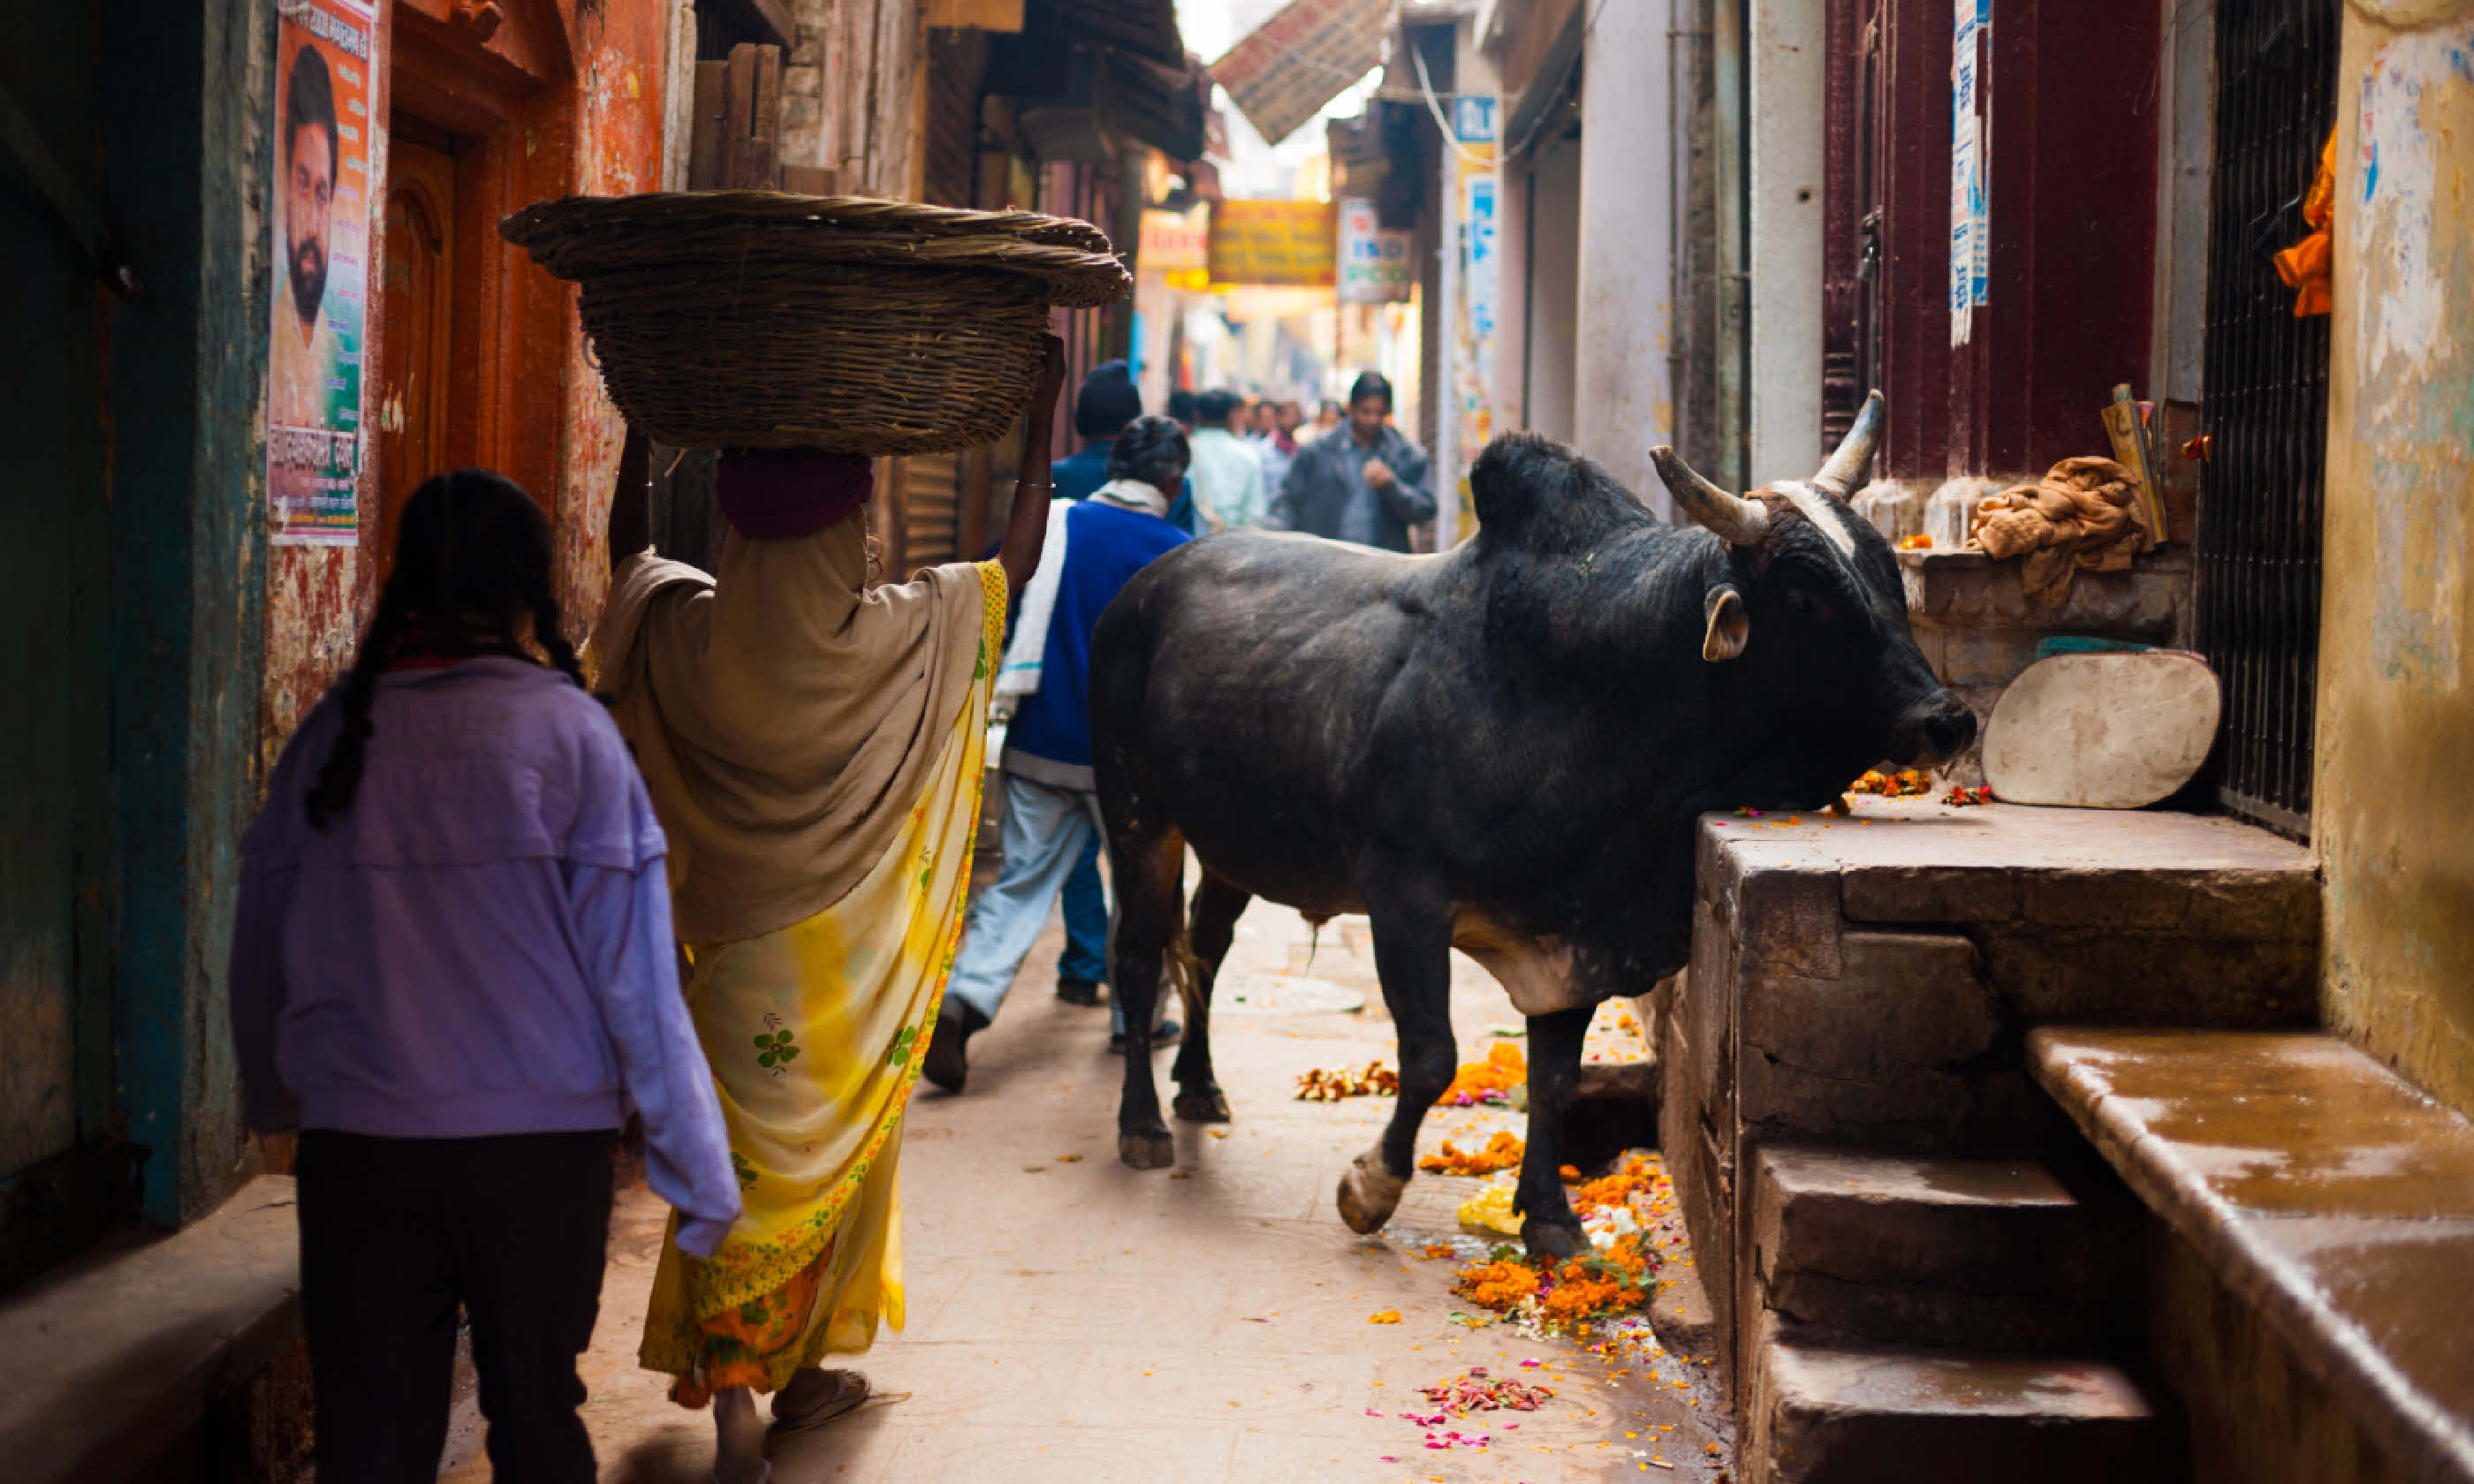 A holy black cow blocks a narrow alley (Shutterstock)